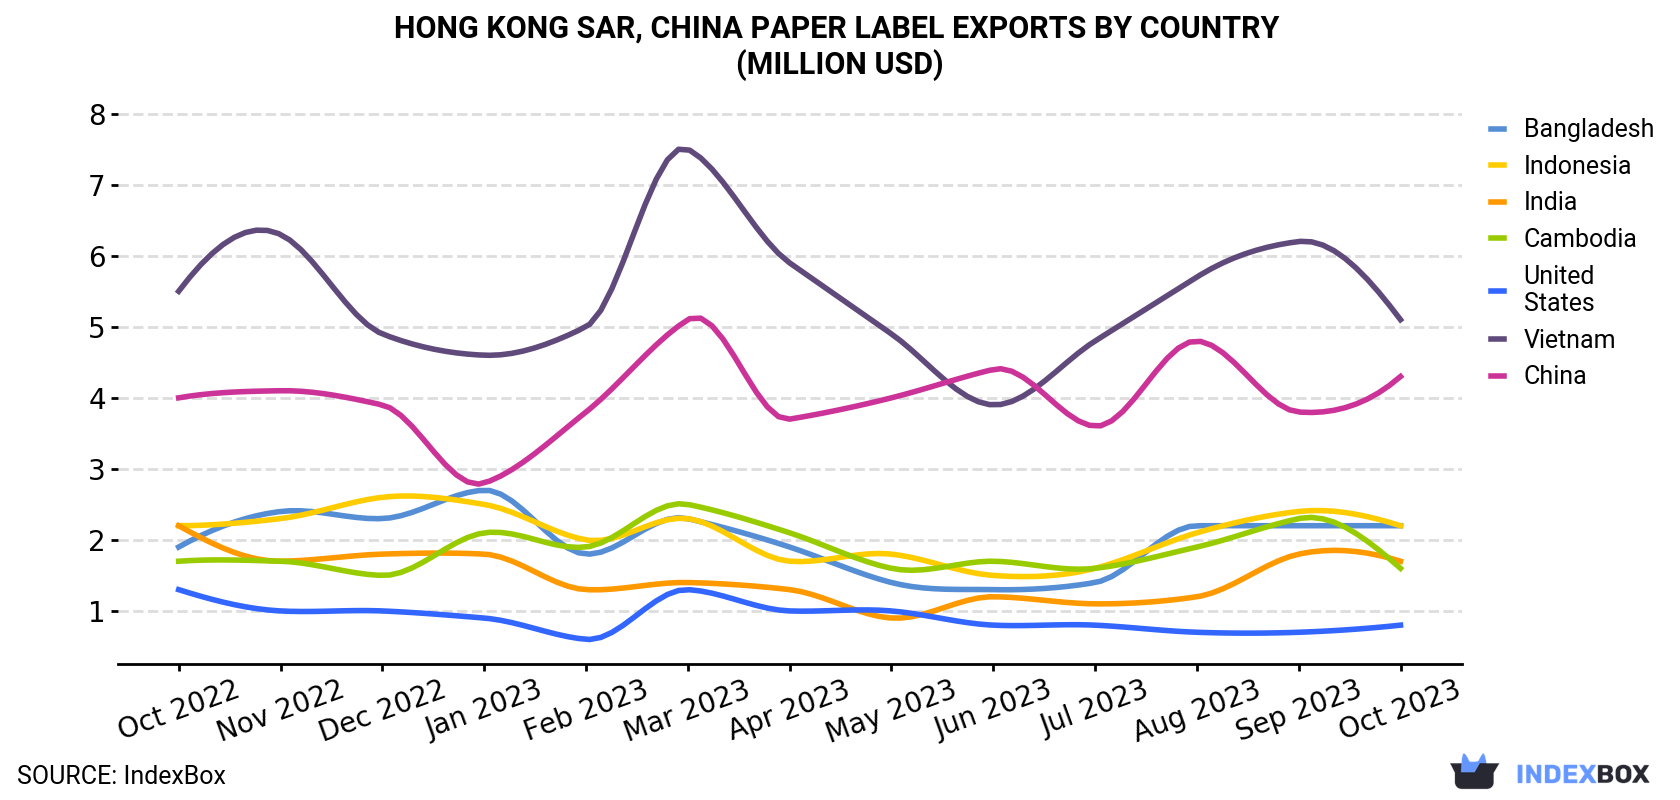 Hong Kong Paper Label Exports By Country (Million USD)